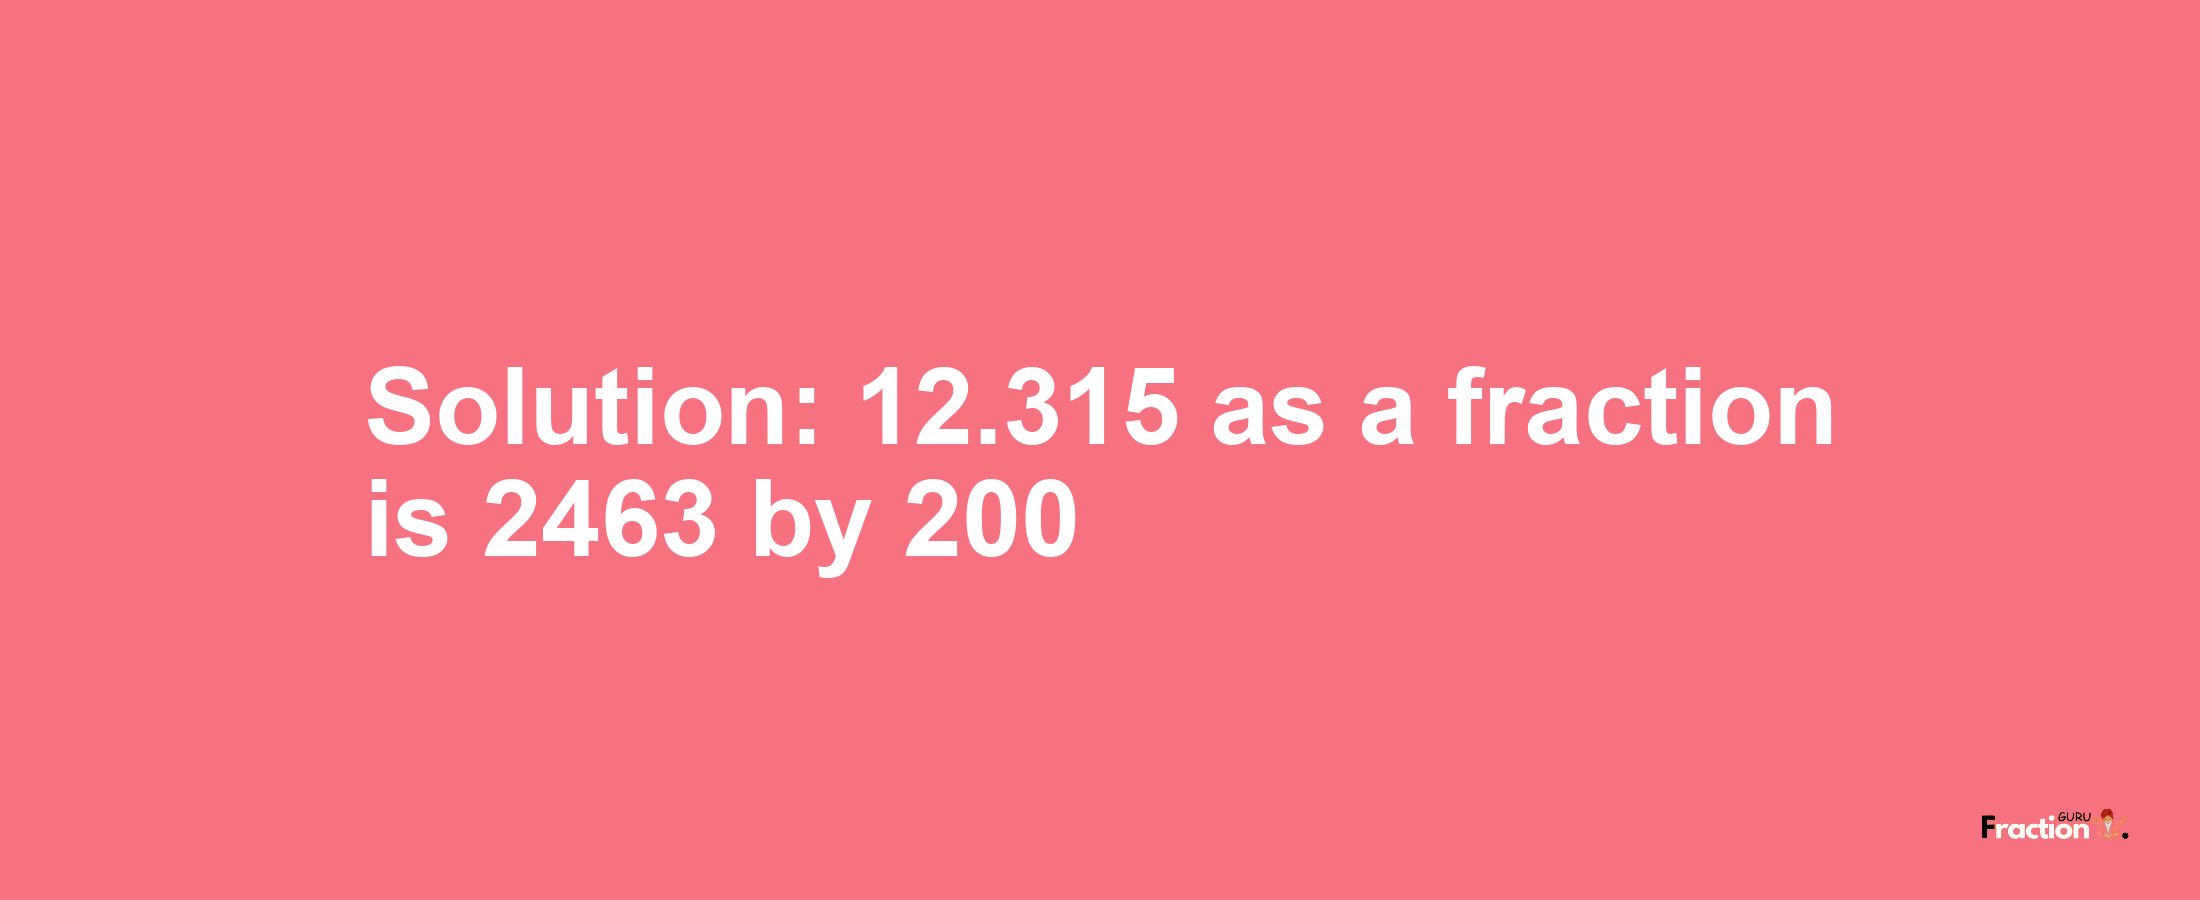 Solution:12.315 as a fraction is 2463/200